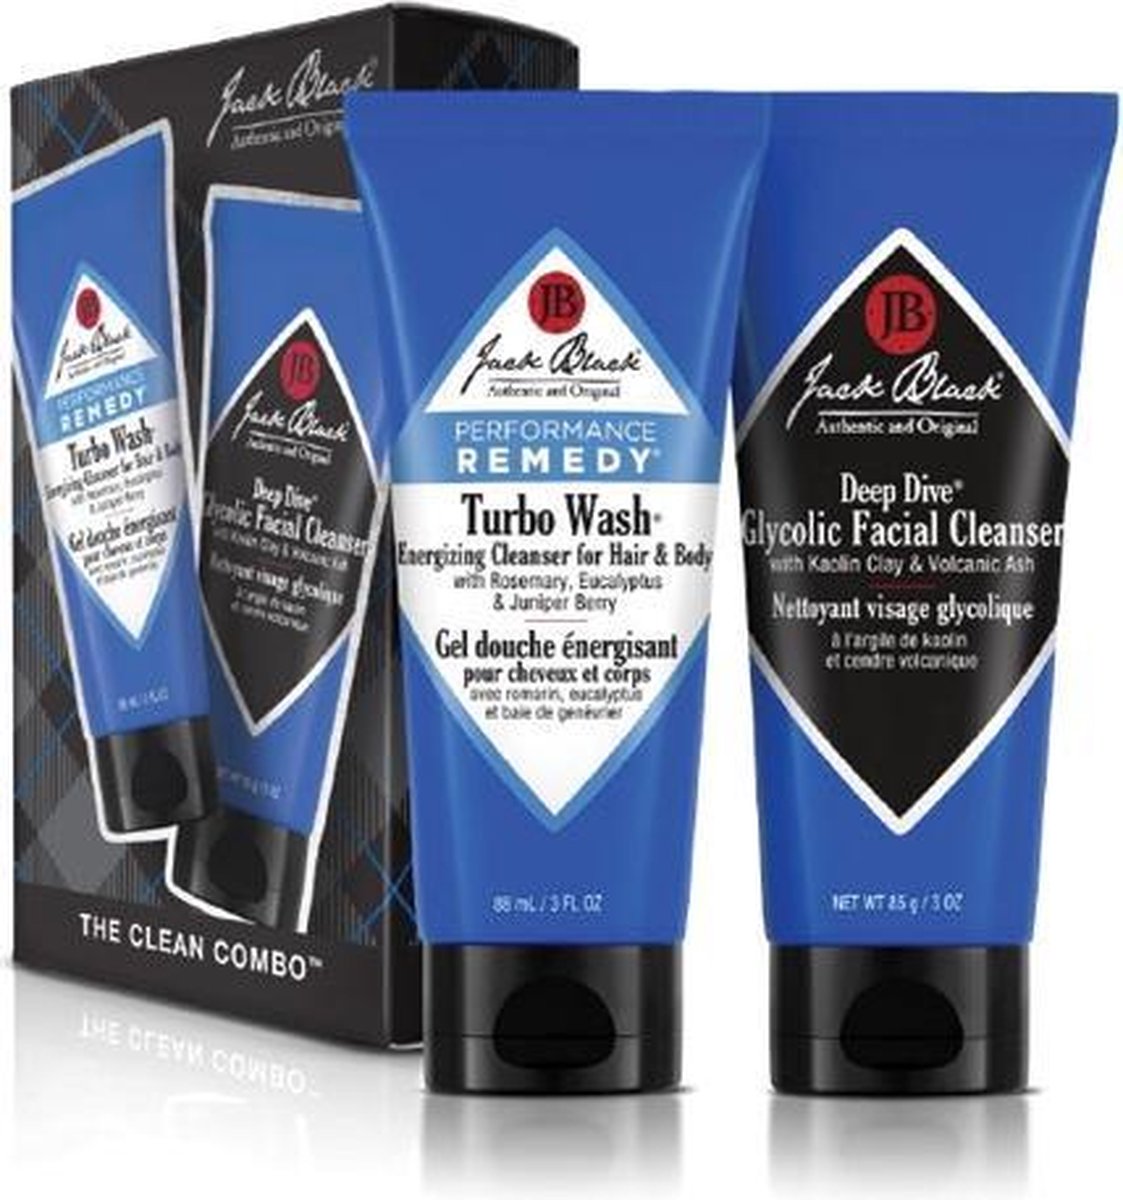 Jack Black The Clean Combo Gift Set